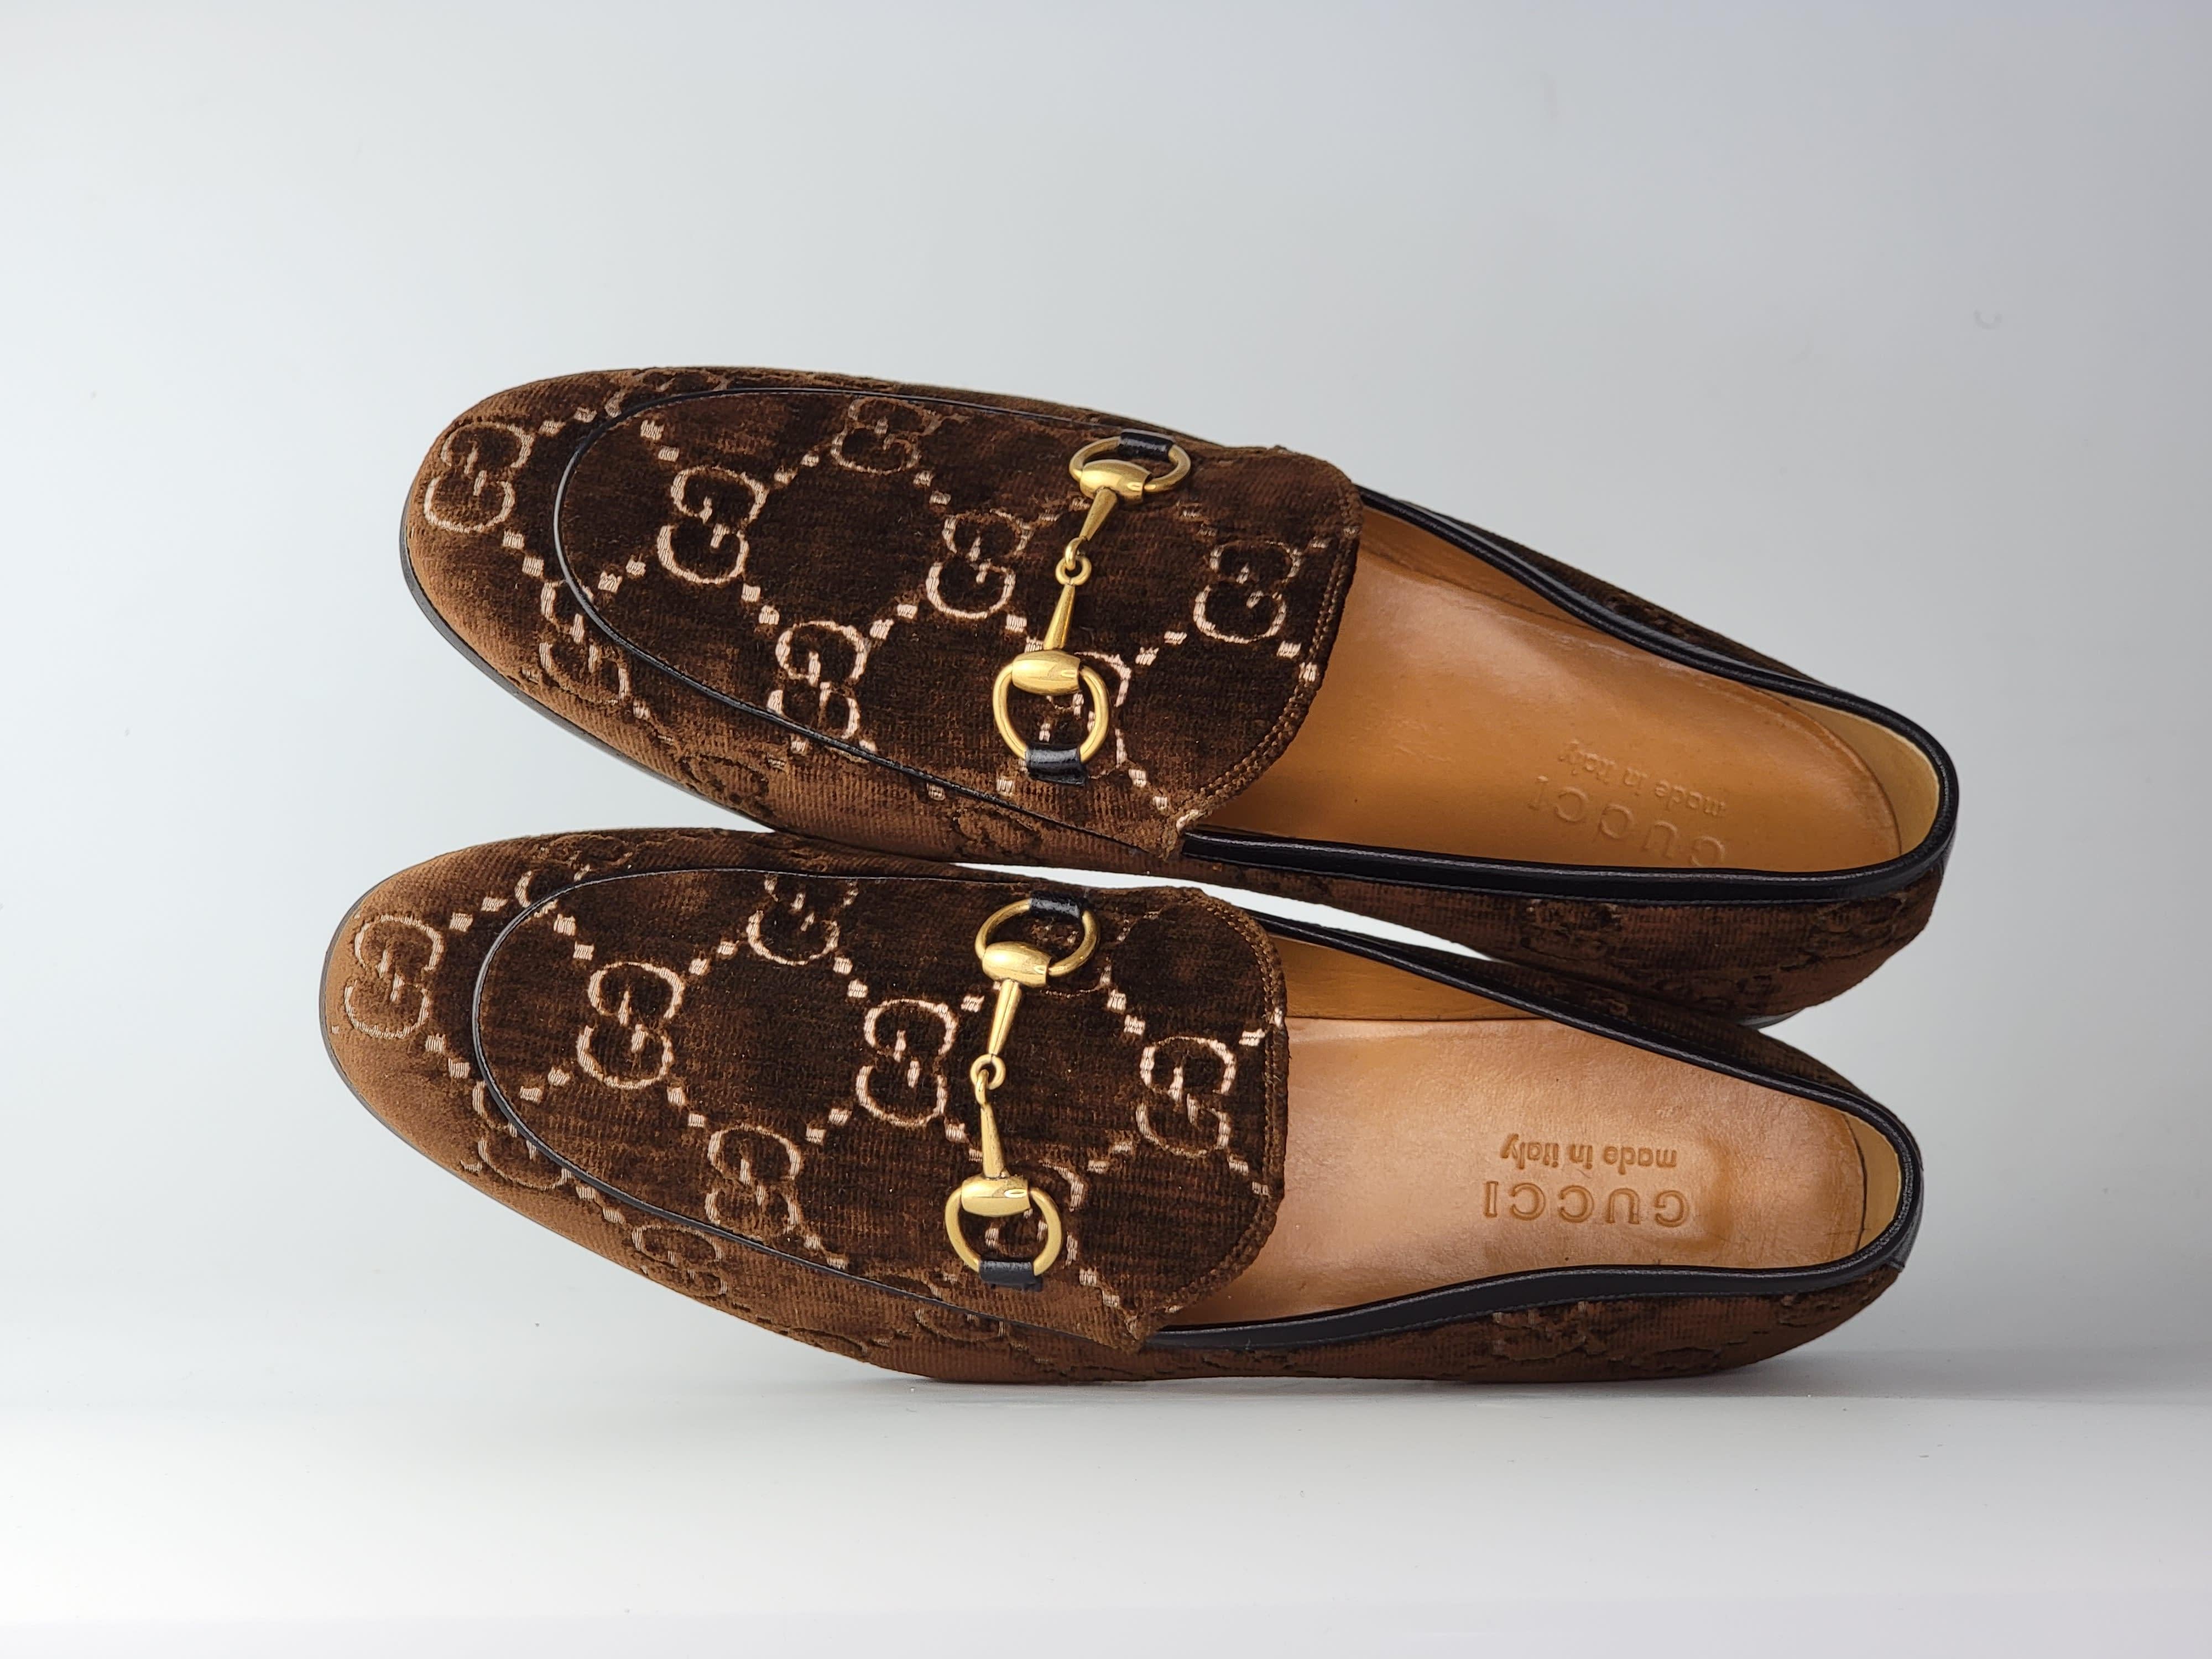 Gucci loafers in brown velvet featuring logo pattern embroidery in beige, an almond moc toe, gold tone horsebit hardware at vamp, tan leather lining and leather trim.

COLOR: Brown 
MATERIAL: Velvet with leather trim
ITEM CODE: 430088
SIZE: 43.5 EU